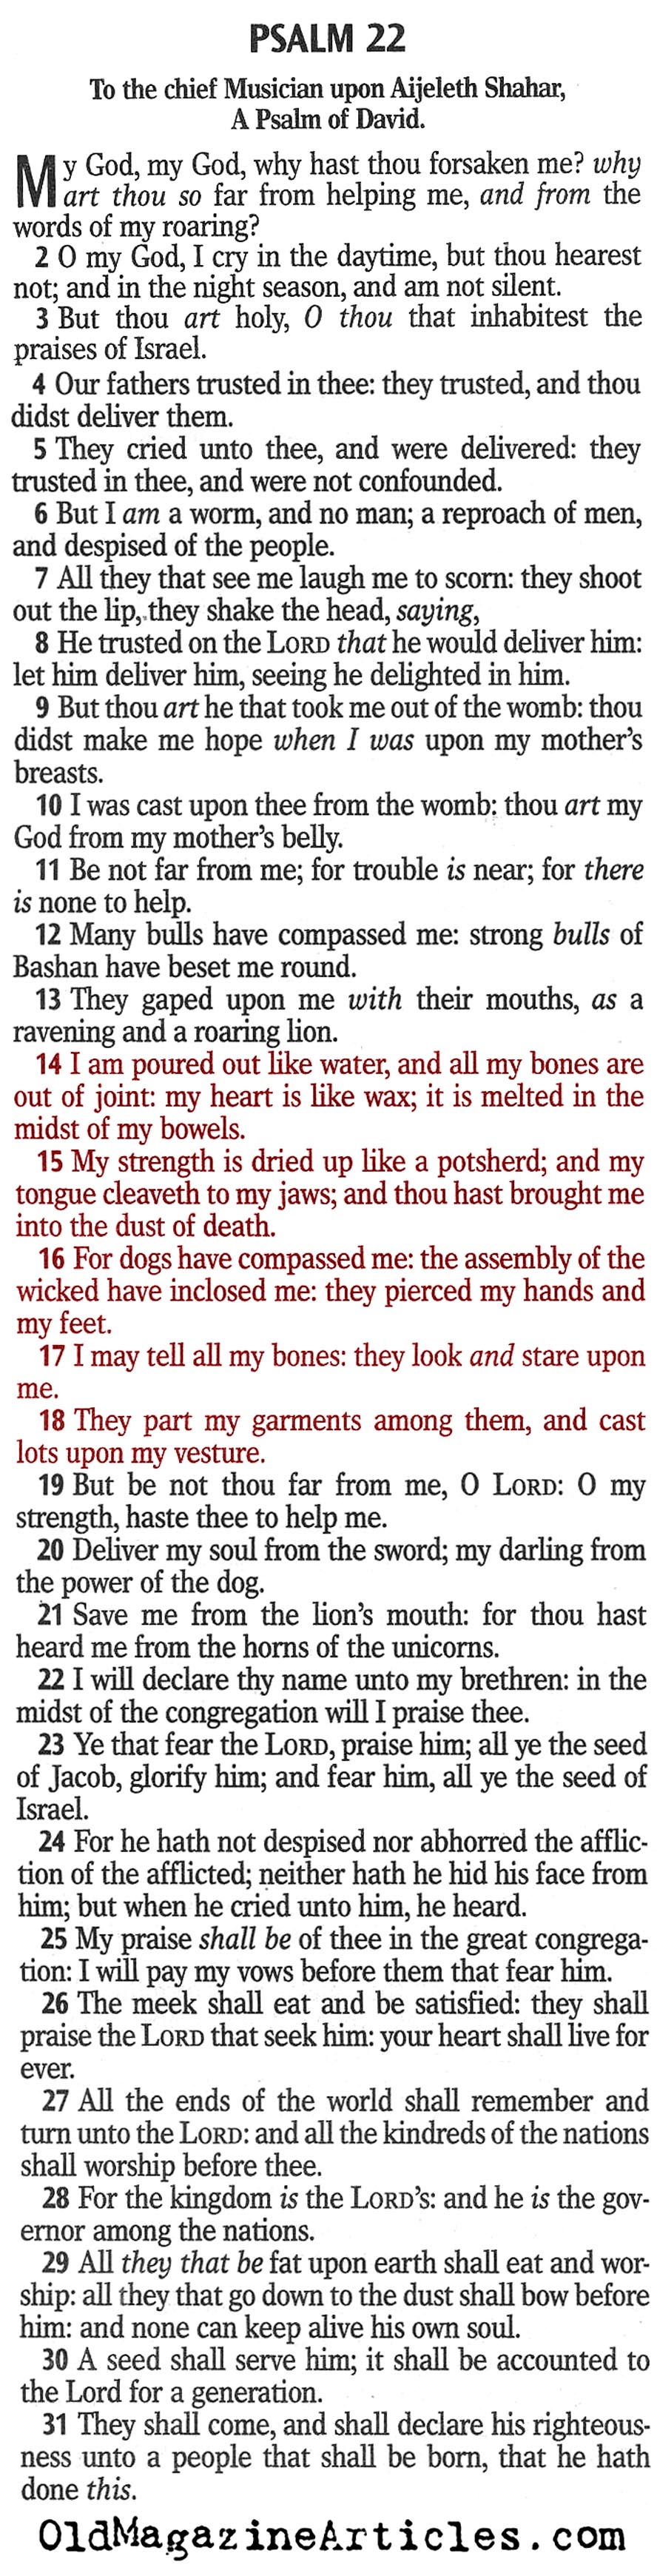 Jesus In The Old Testament (Book of Psalms)